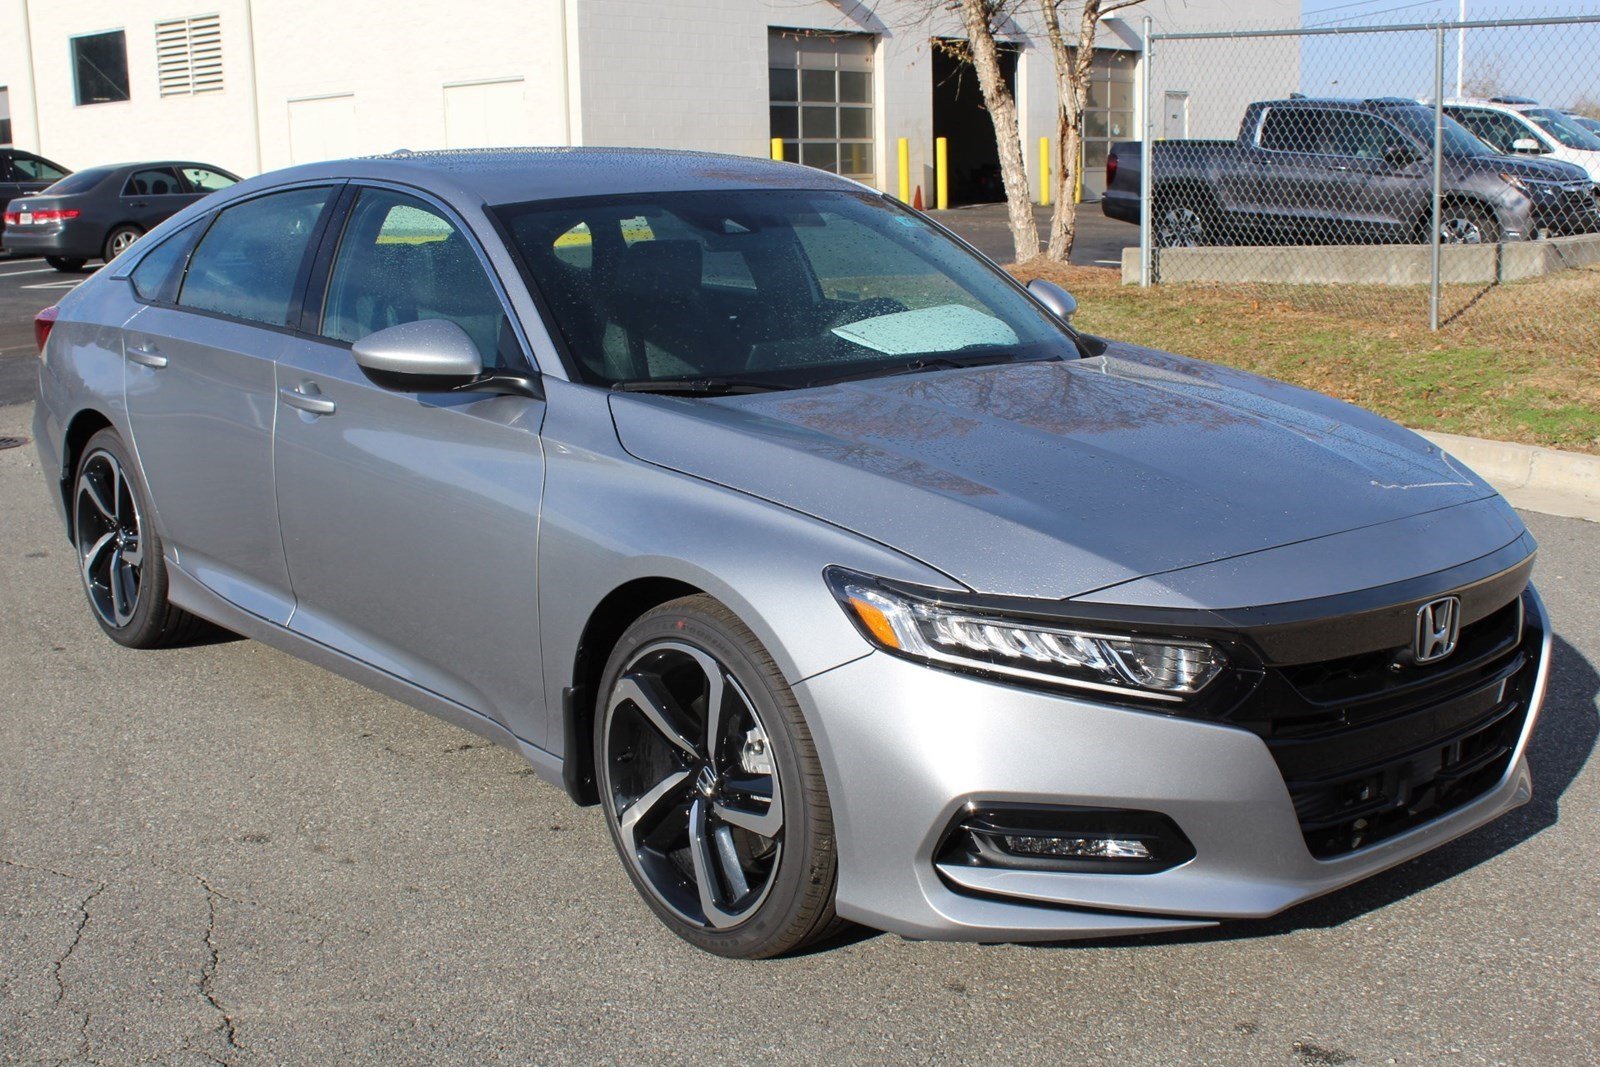 New 2020 Honda Accord Sport 1.5T 4dr Car in Milledgeville #H20070